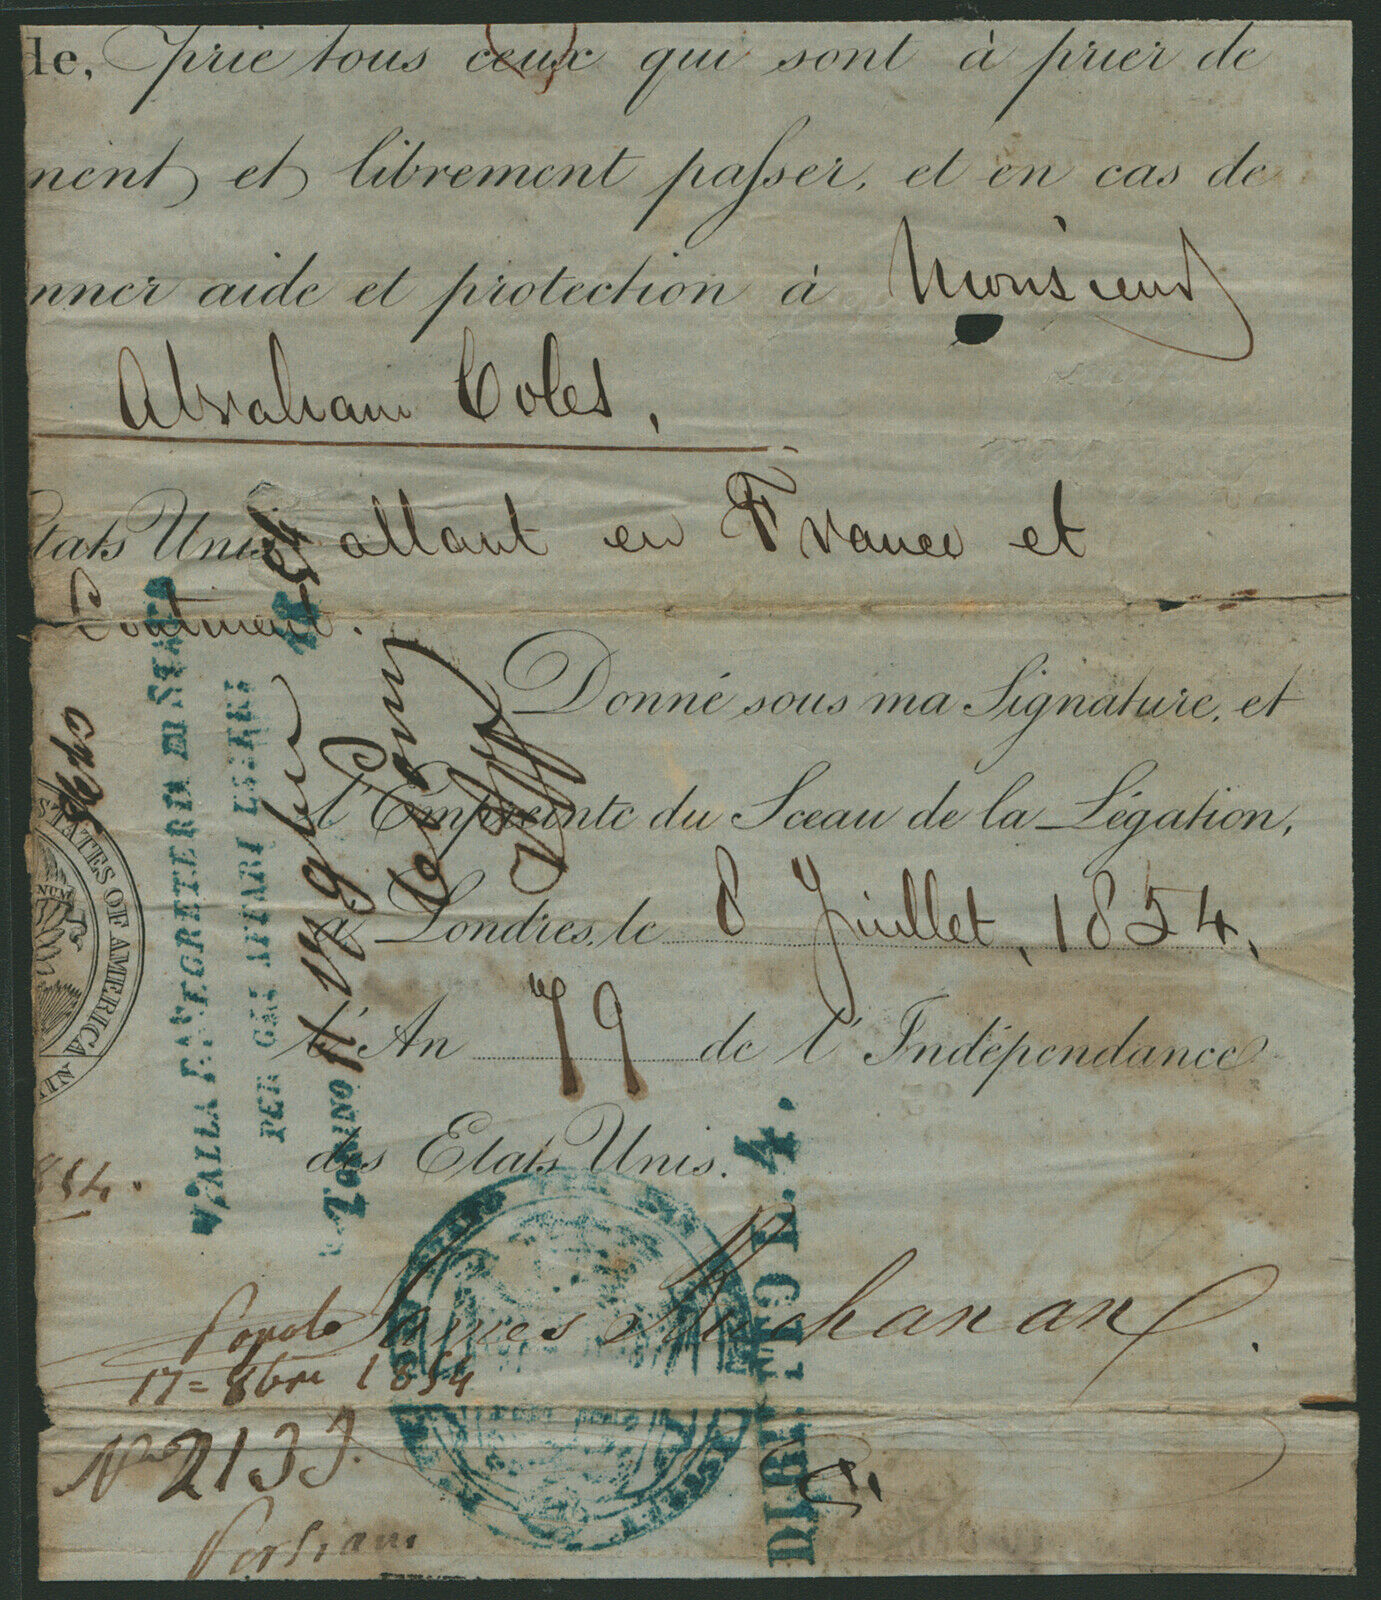 JAMES BUCHANAN - PRINTED DOCUMENT FRAGMENT SIGNED IN INK 07/08/1854